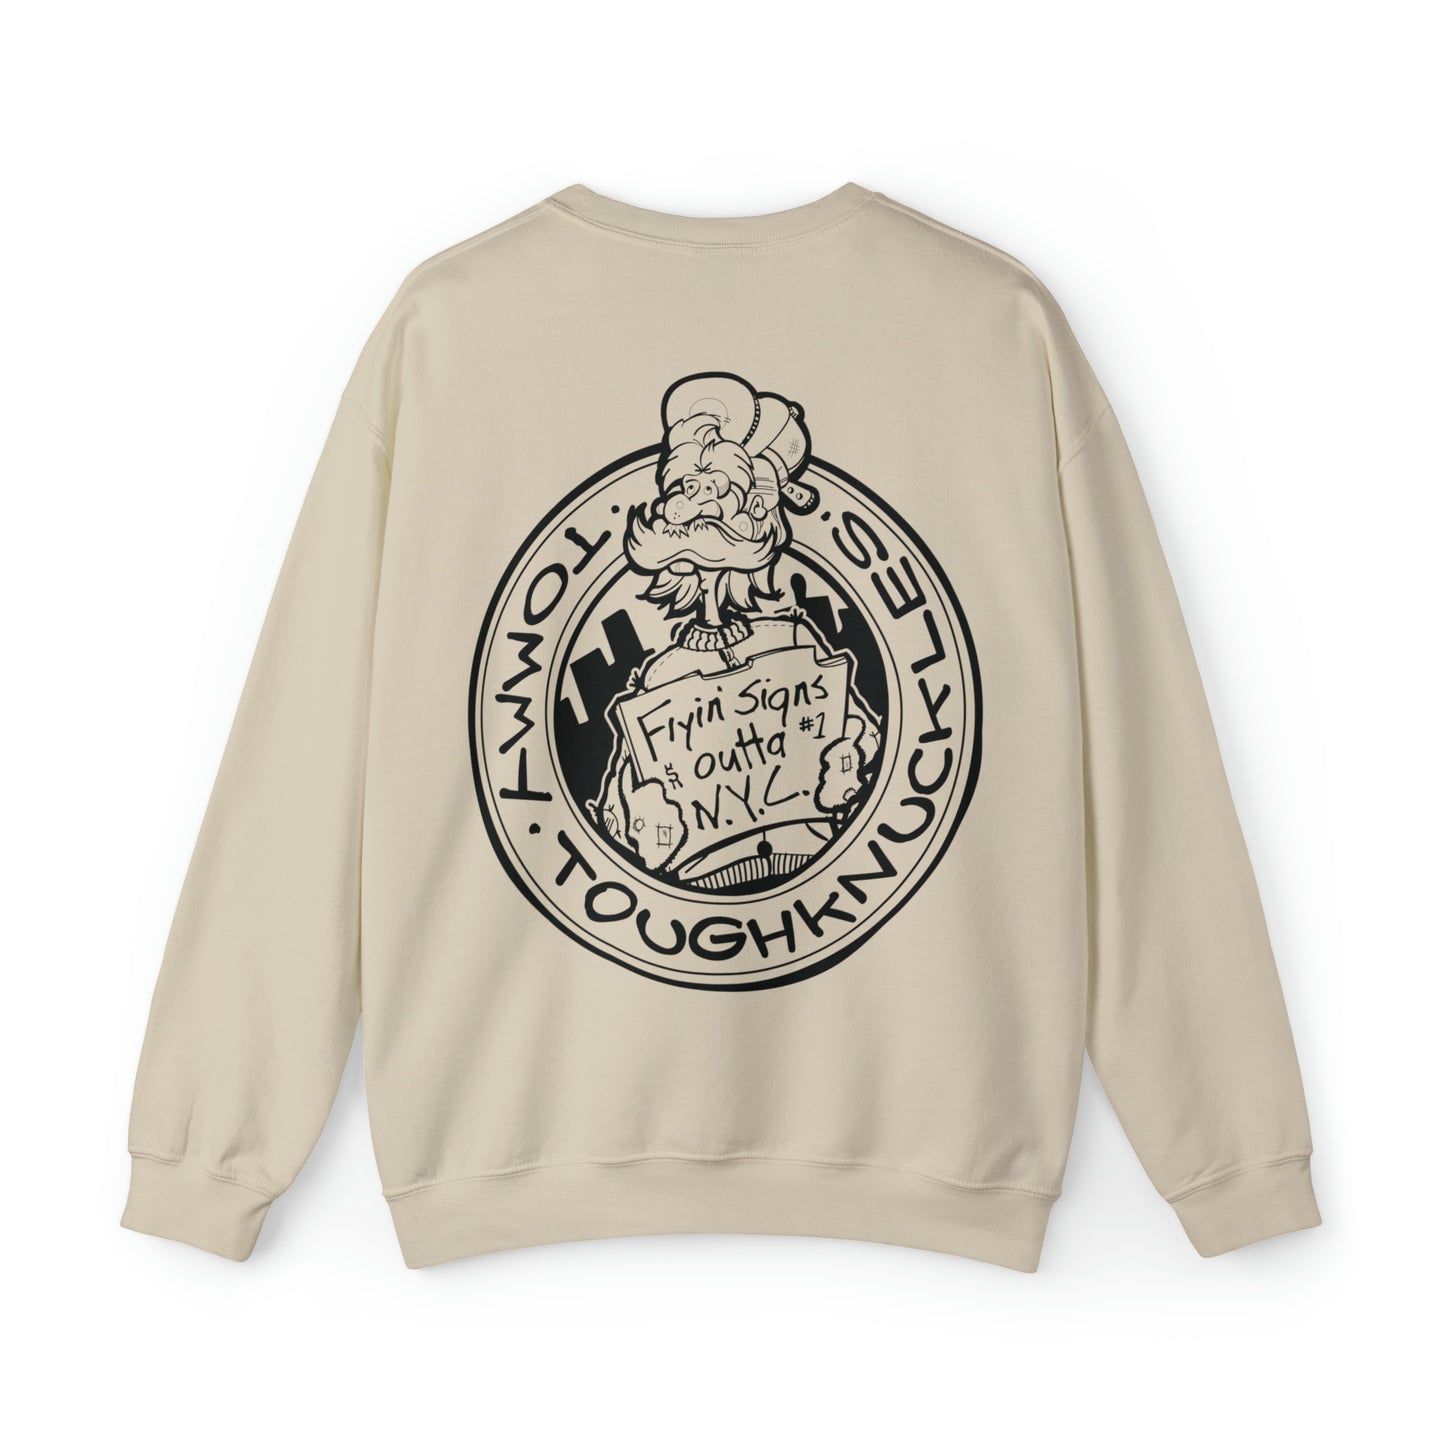 Tommy ToughKnuckles - Crew Neck